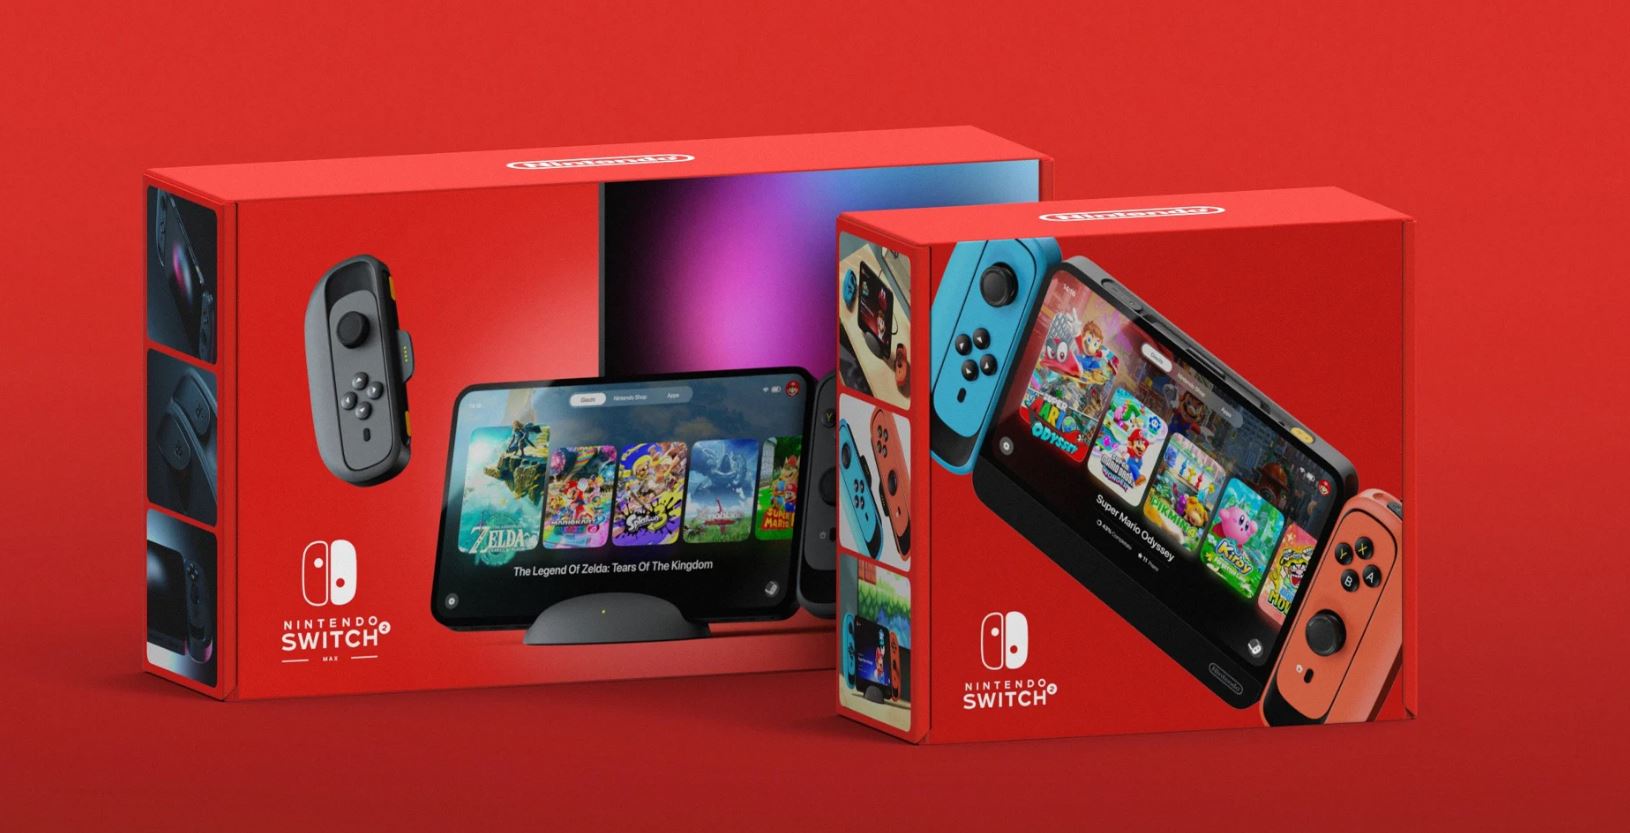 The rumours have been circulating for a while now about the next console from Nintendo. The latest rumours on the Nintendo Switch 2 speak of an announ